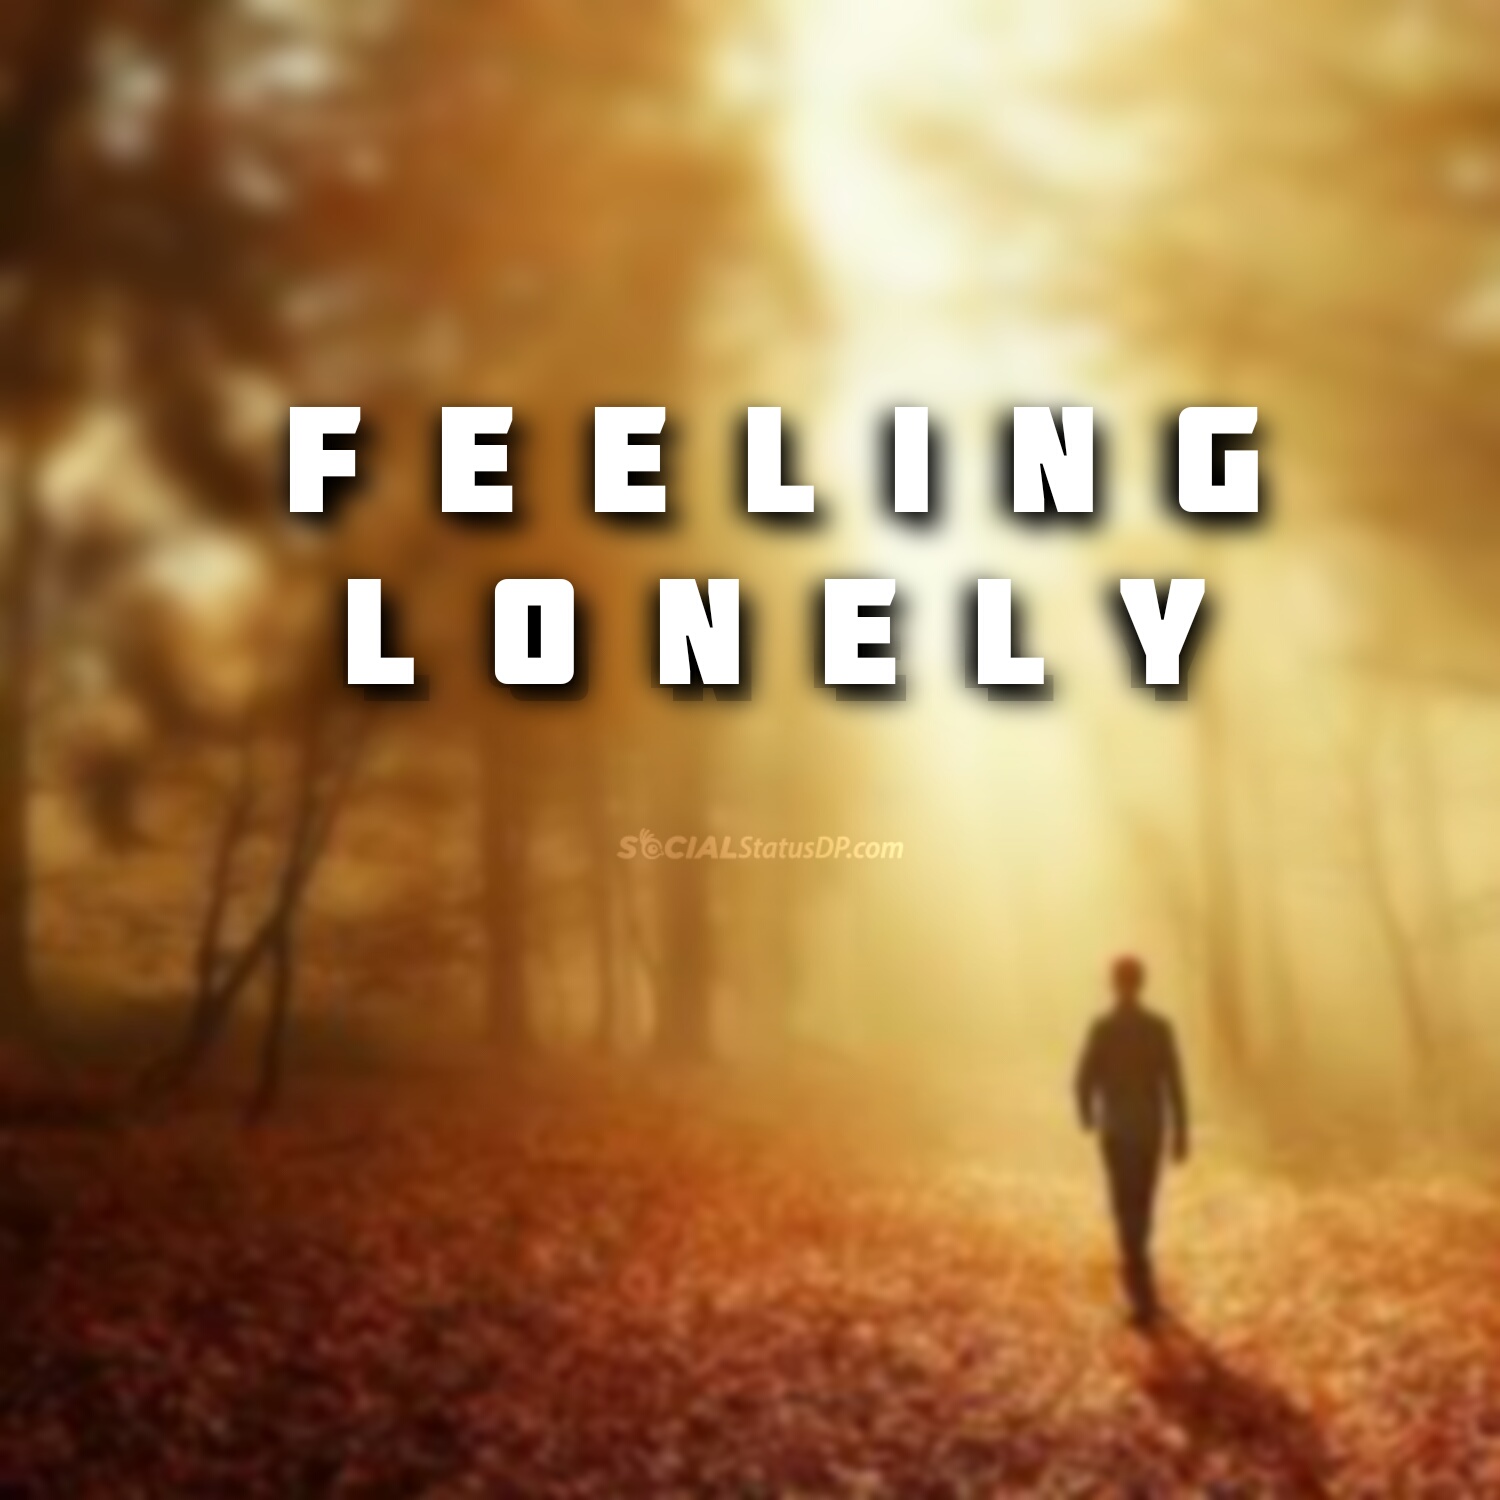 Best Whatsapp Lonely Status, Alone Quotes, Loneliness - Feel Lonely Quotes In Tamil - HD Wallpaper 